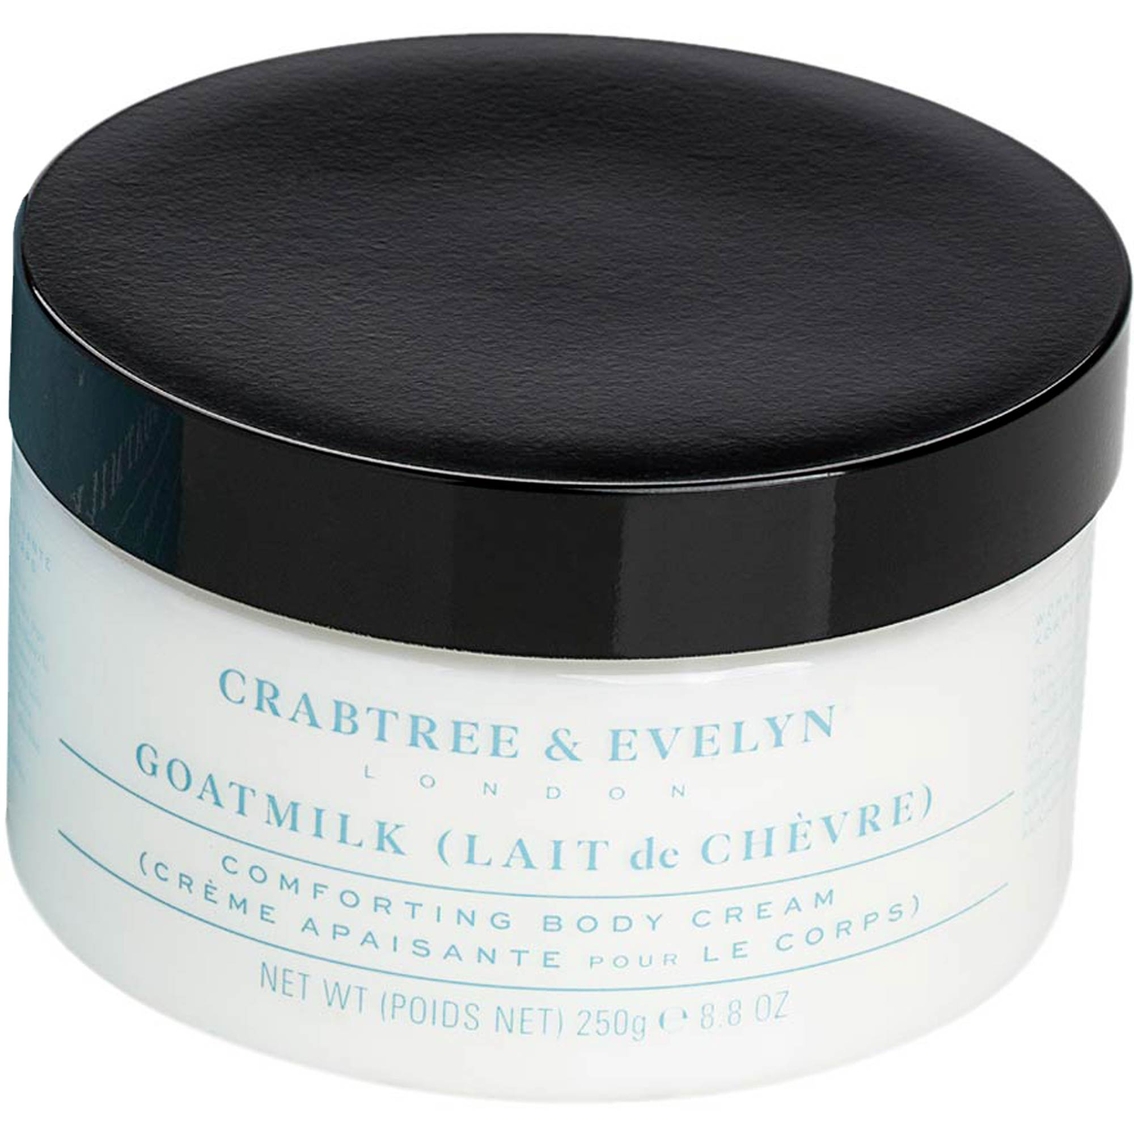 Crabtree Evelyn Goatmilk Body Cream Crabtree And Evelyn Beauty Health Shop The Exchange